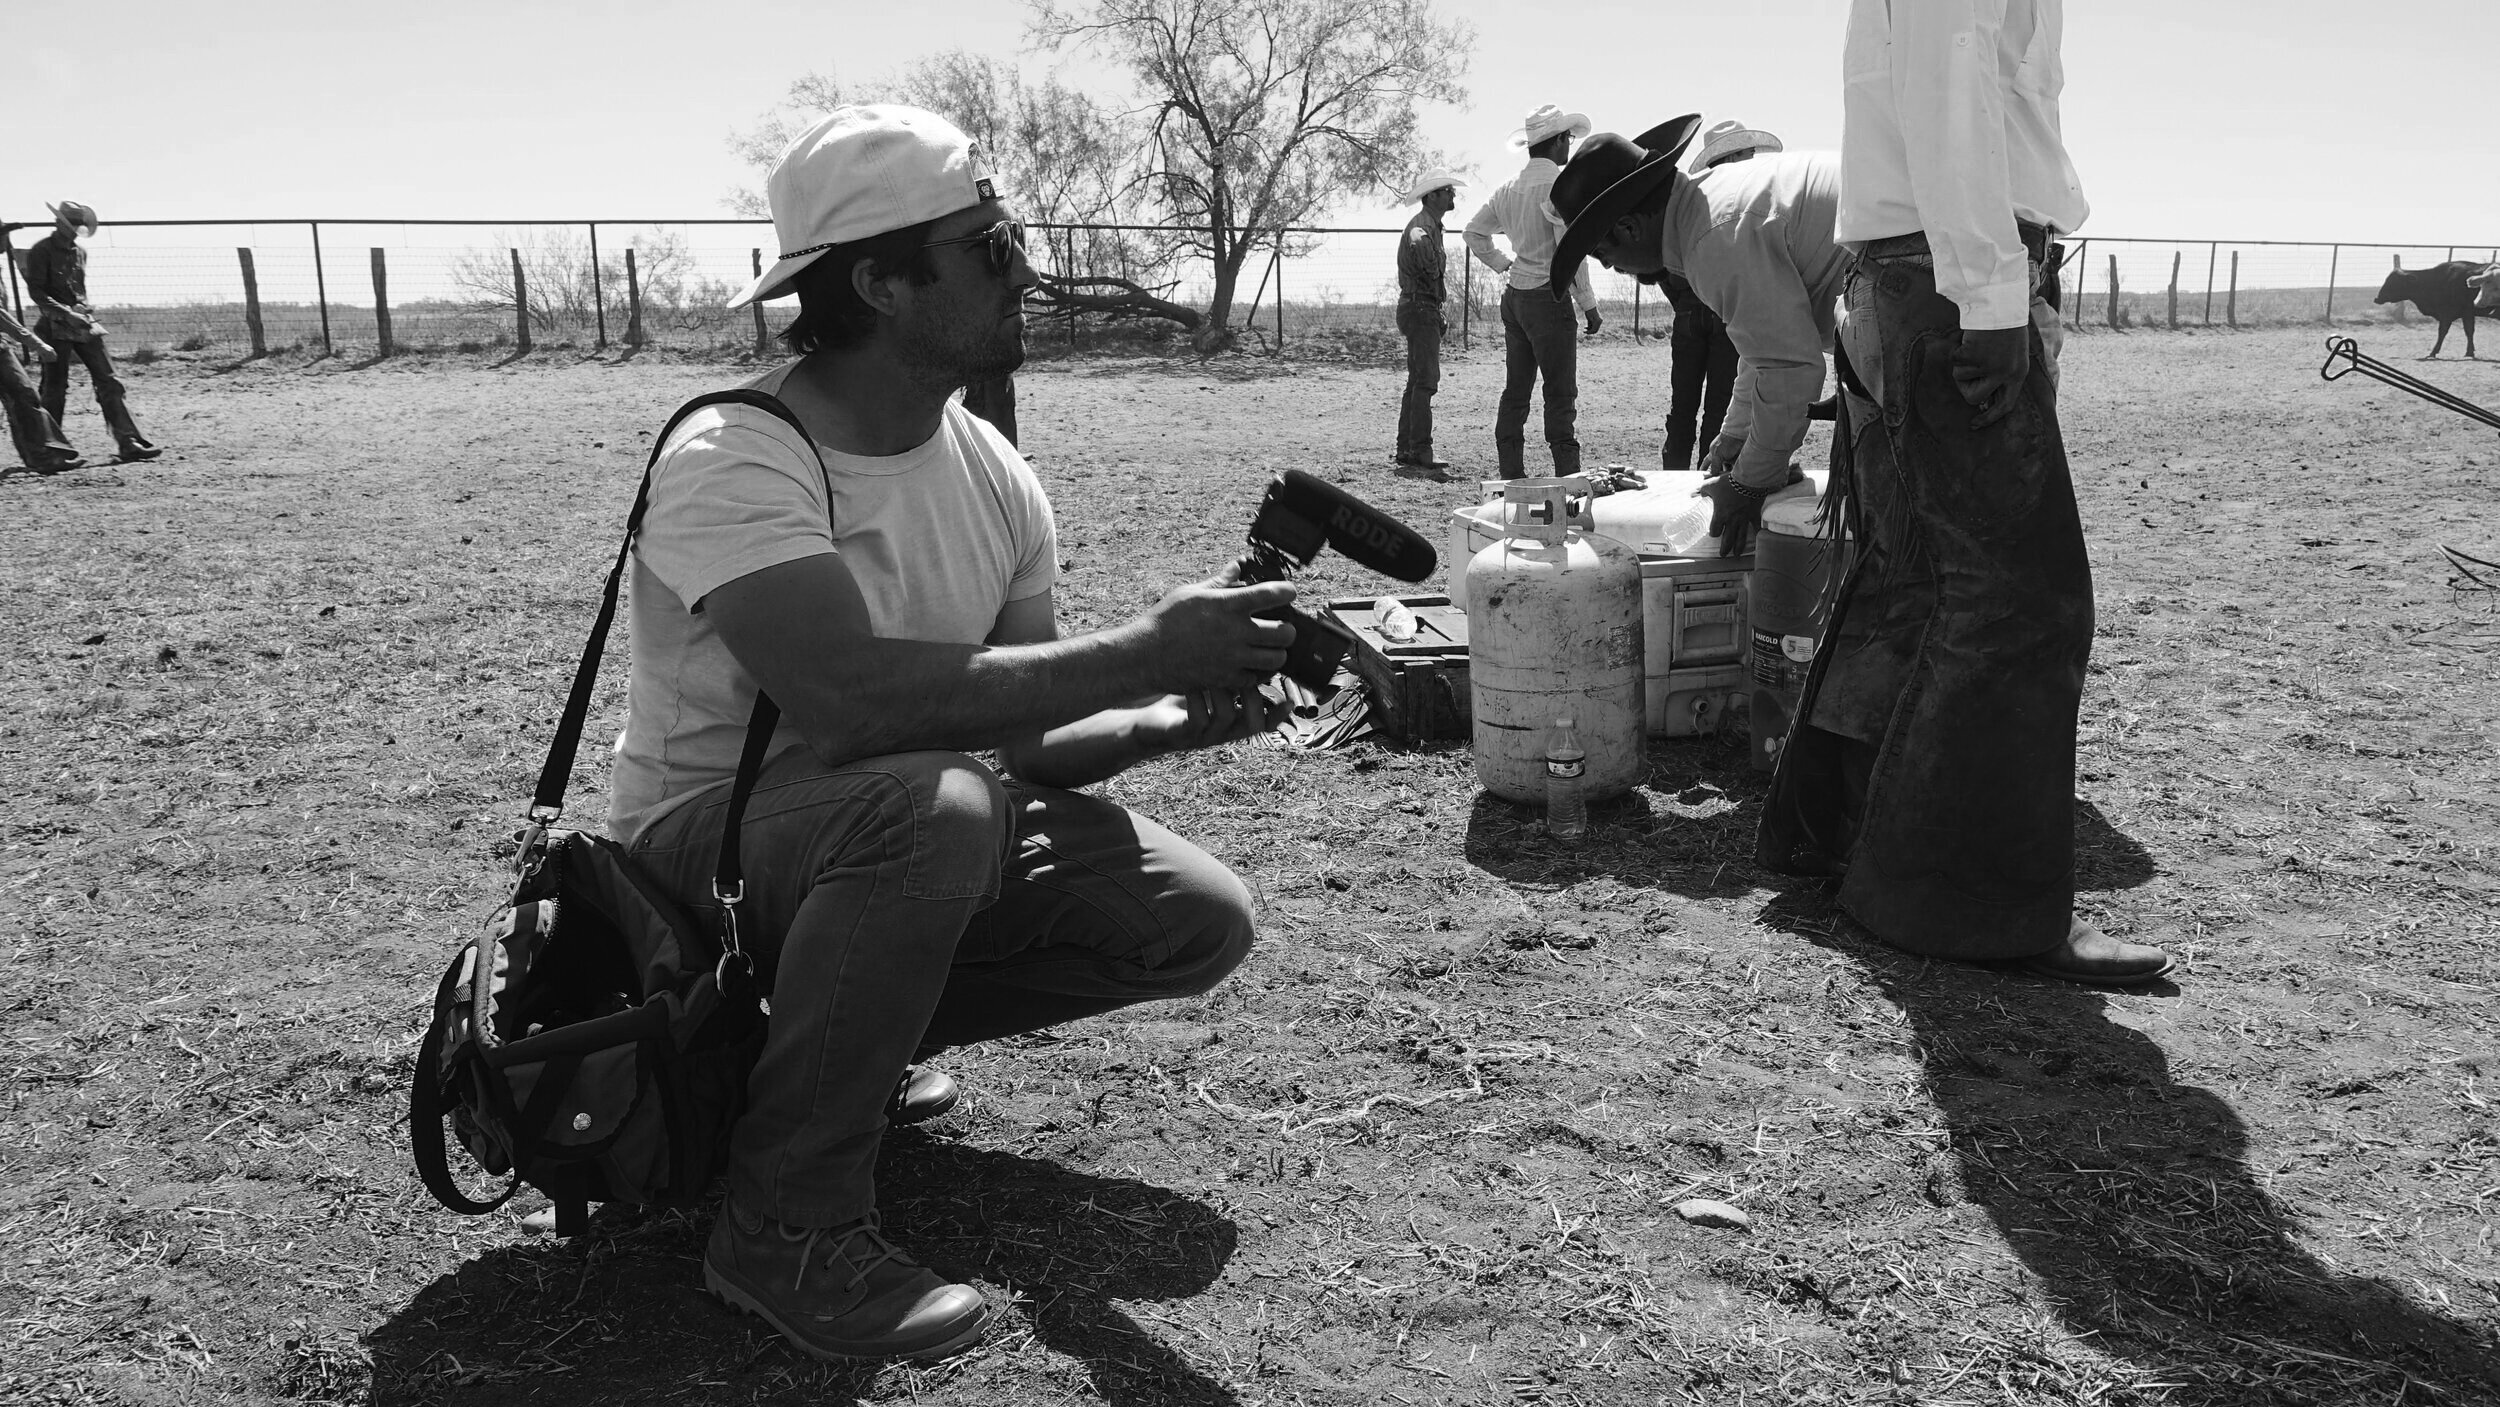  Camera operator Tito West working light and fast as cowboys brand cattle. The crew had to operate with as small a footprint as possible in order to minimize interference with the livestock and work.  